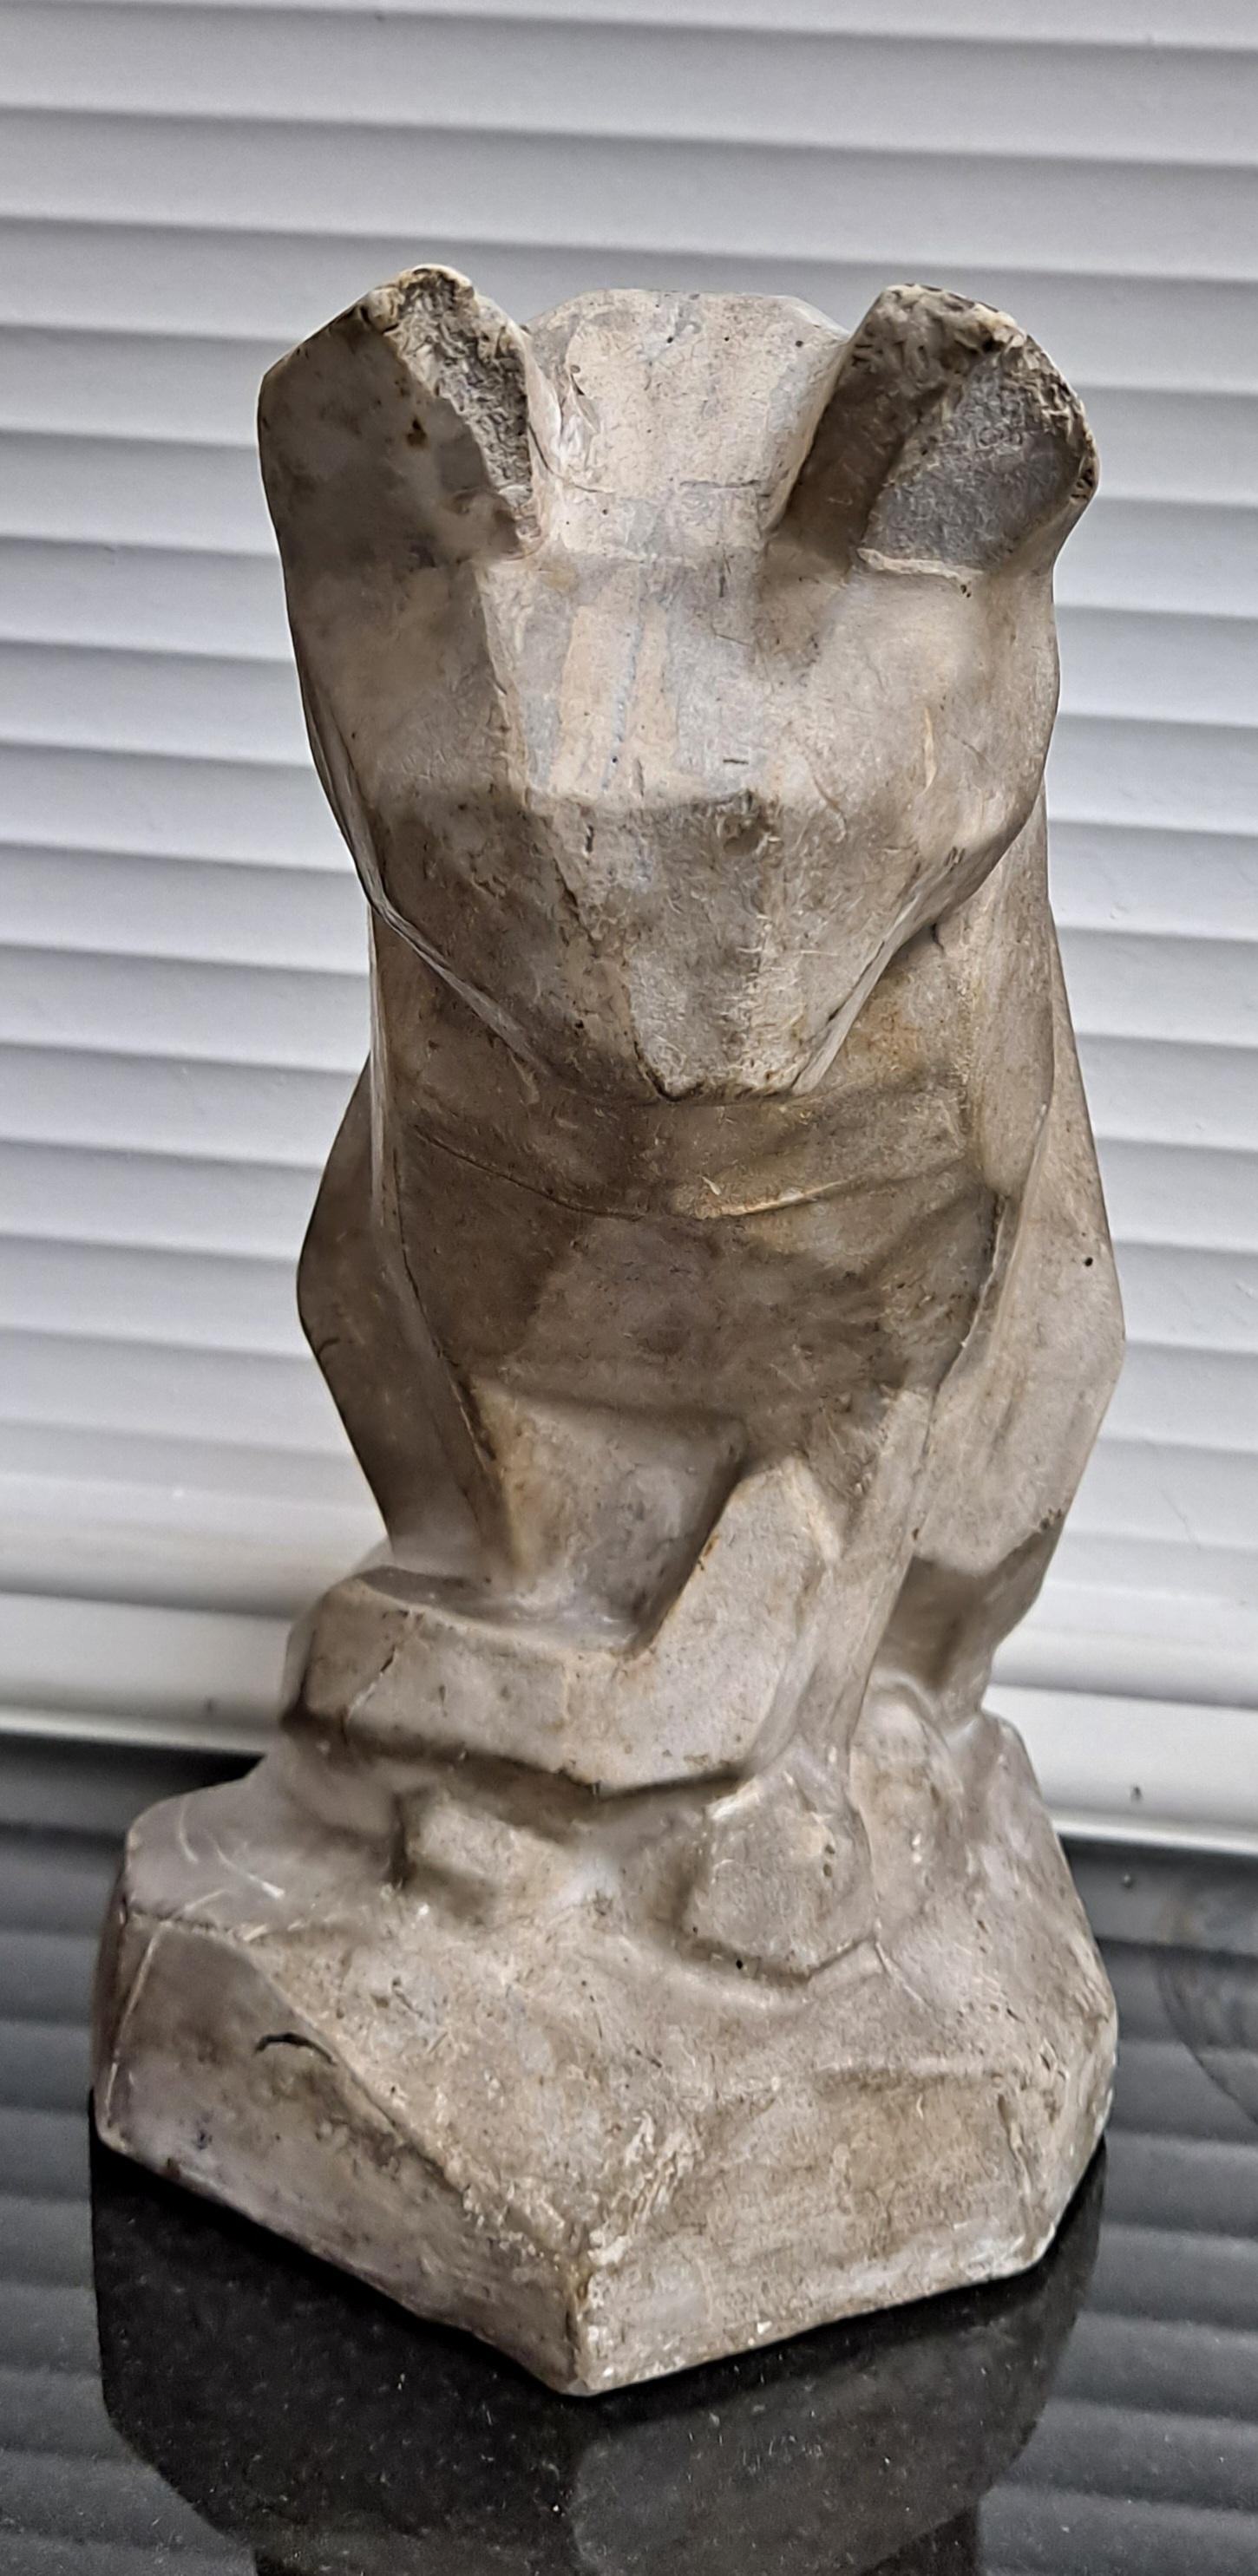 Geometric Form Plaster Cat Sculpture

Appears to be an adaptation of 